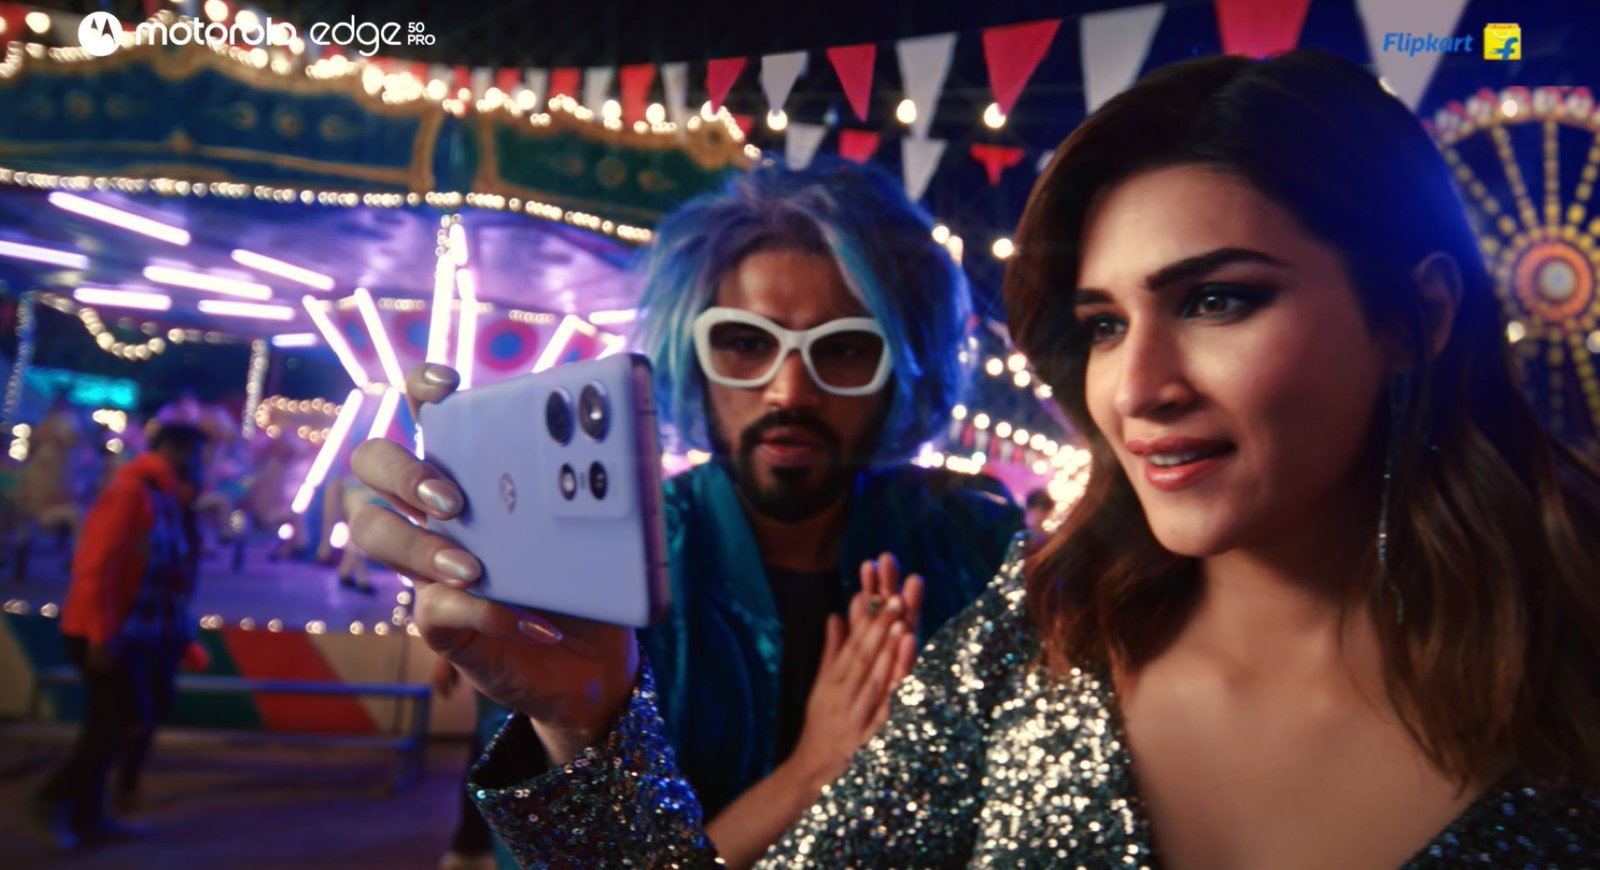 Motorola's new ad with Kriti Sanon and Babil Khan showcases the AI-powered edge50 pro with an 'Intelligence Meets Art' theme.